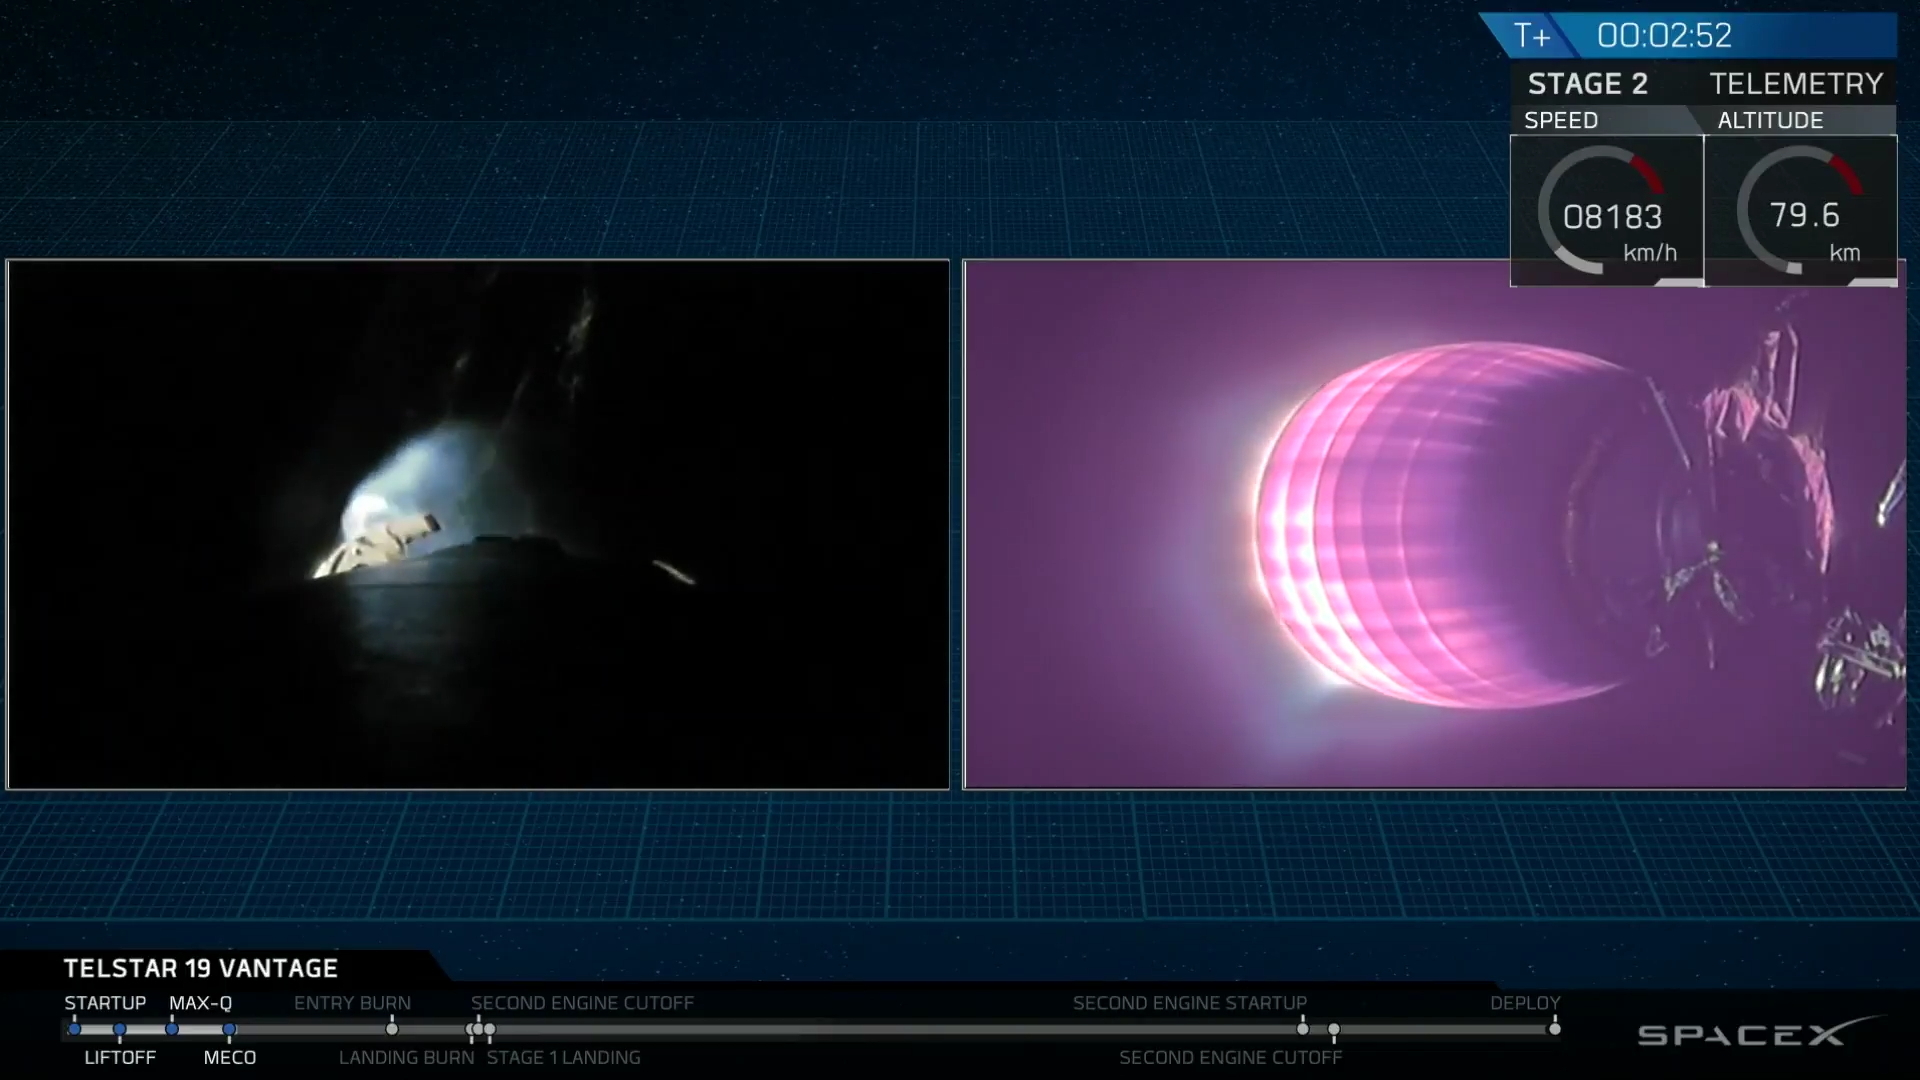 Second Stage plasma / On first stage, Grid Fins (SpaceX)